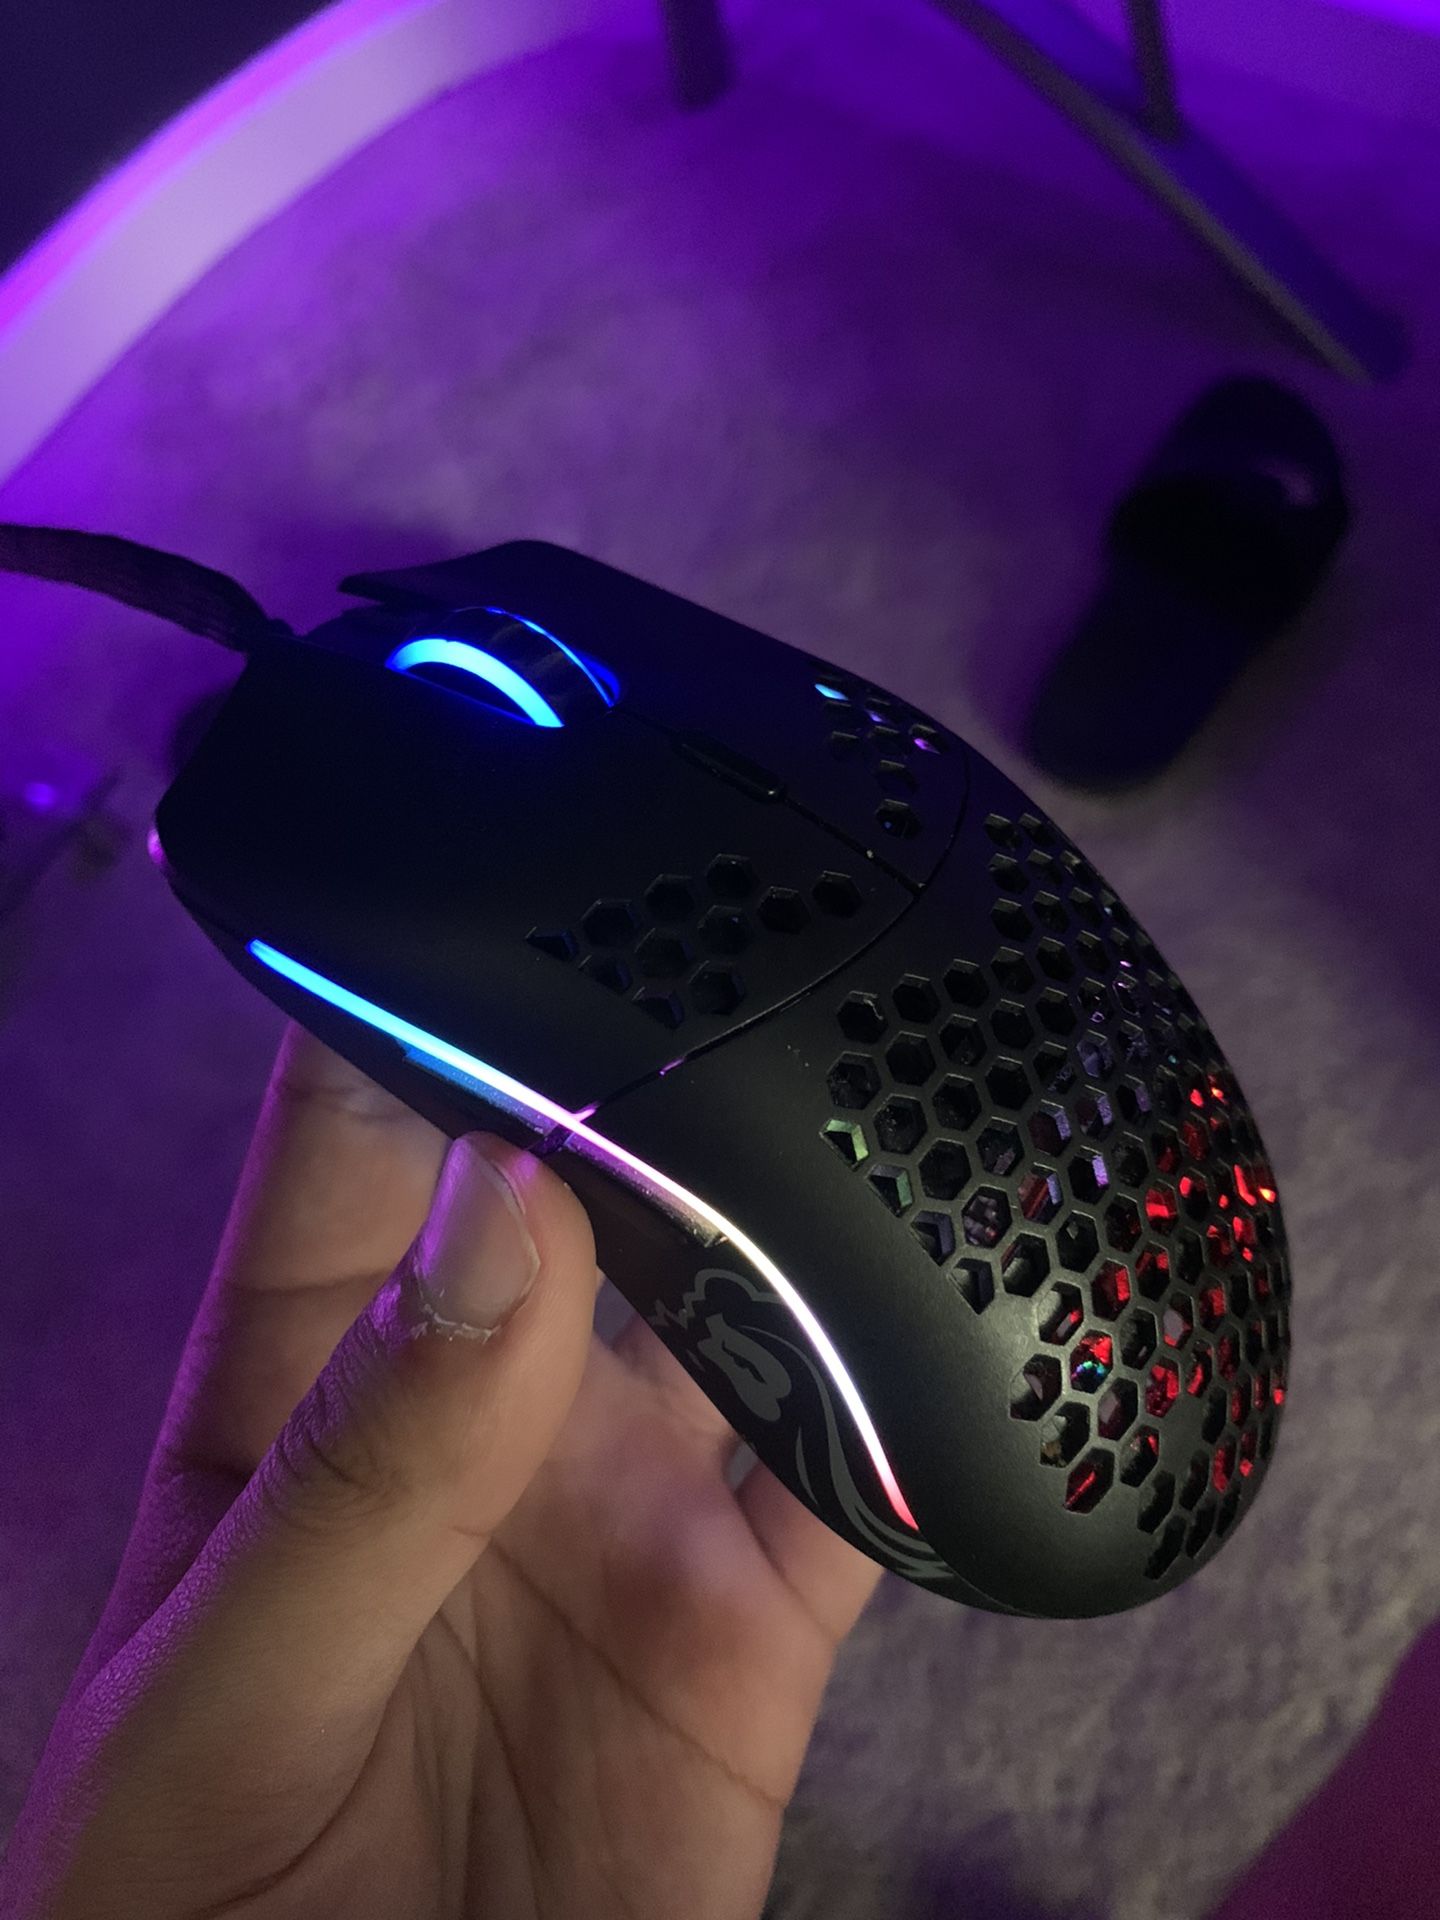 Glorious Model O RGB Ultralight Weight Gaming Mouse